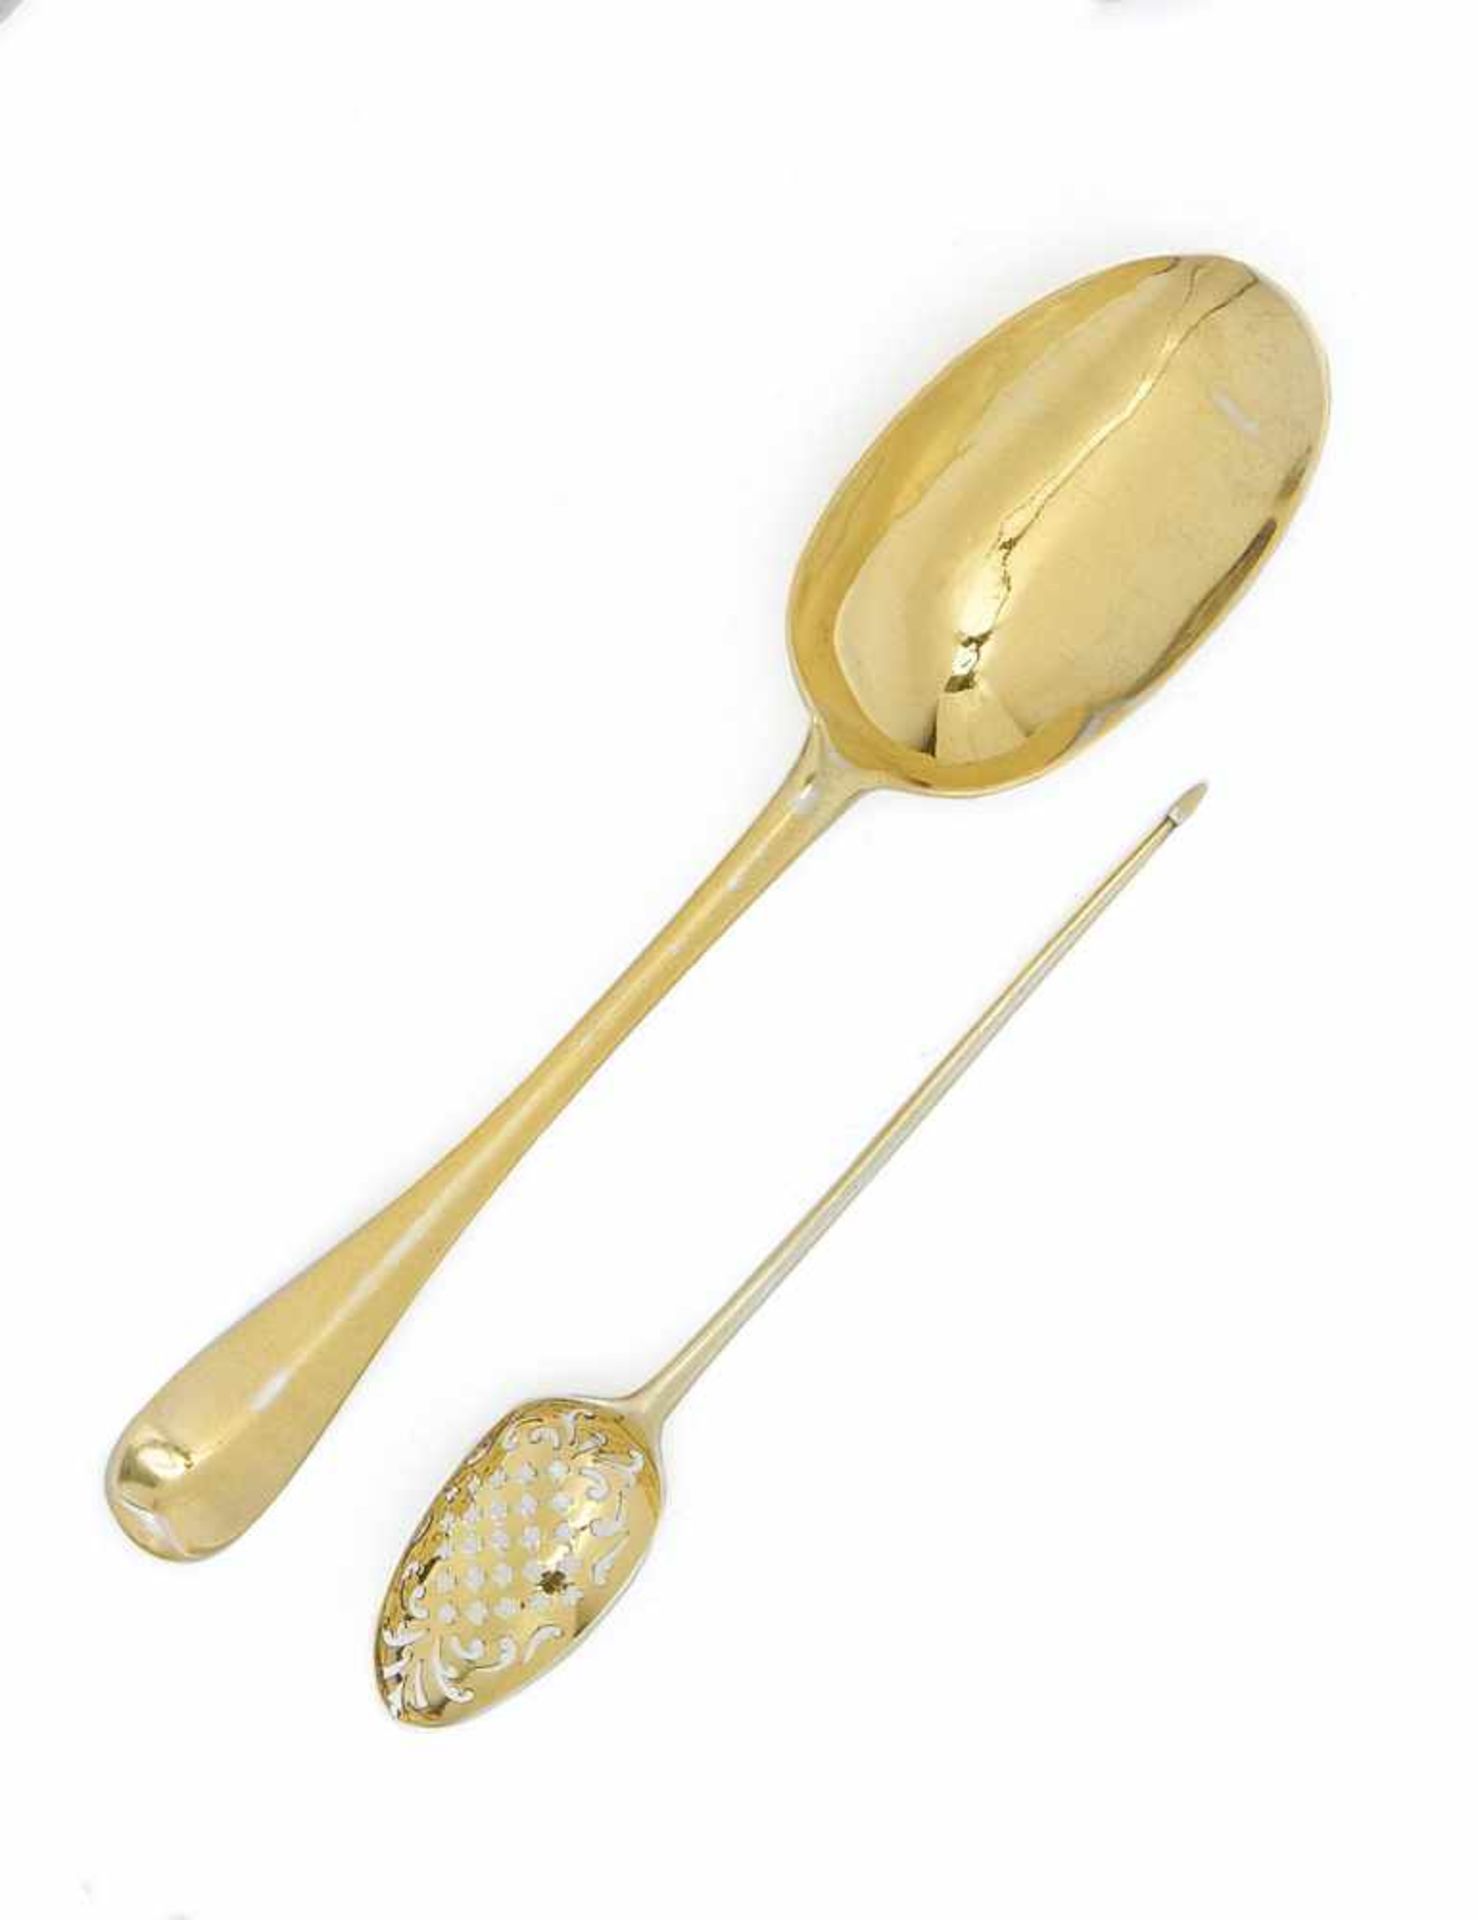 GILT STRAINER SPOON AND LARGE GILT SPOON.